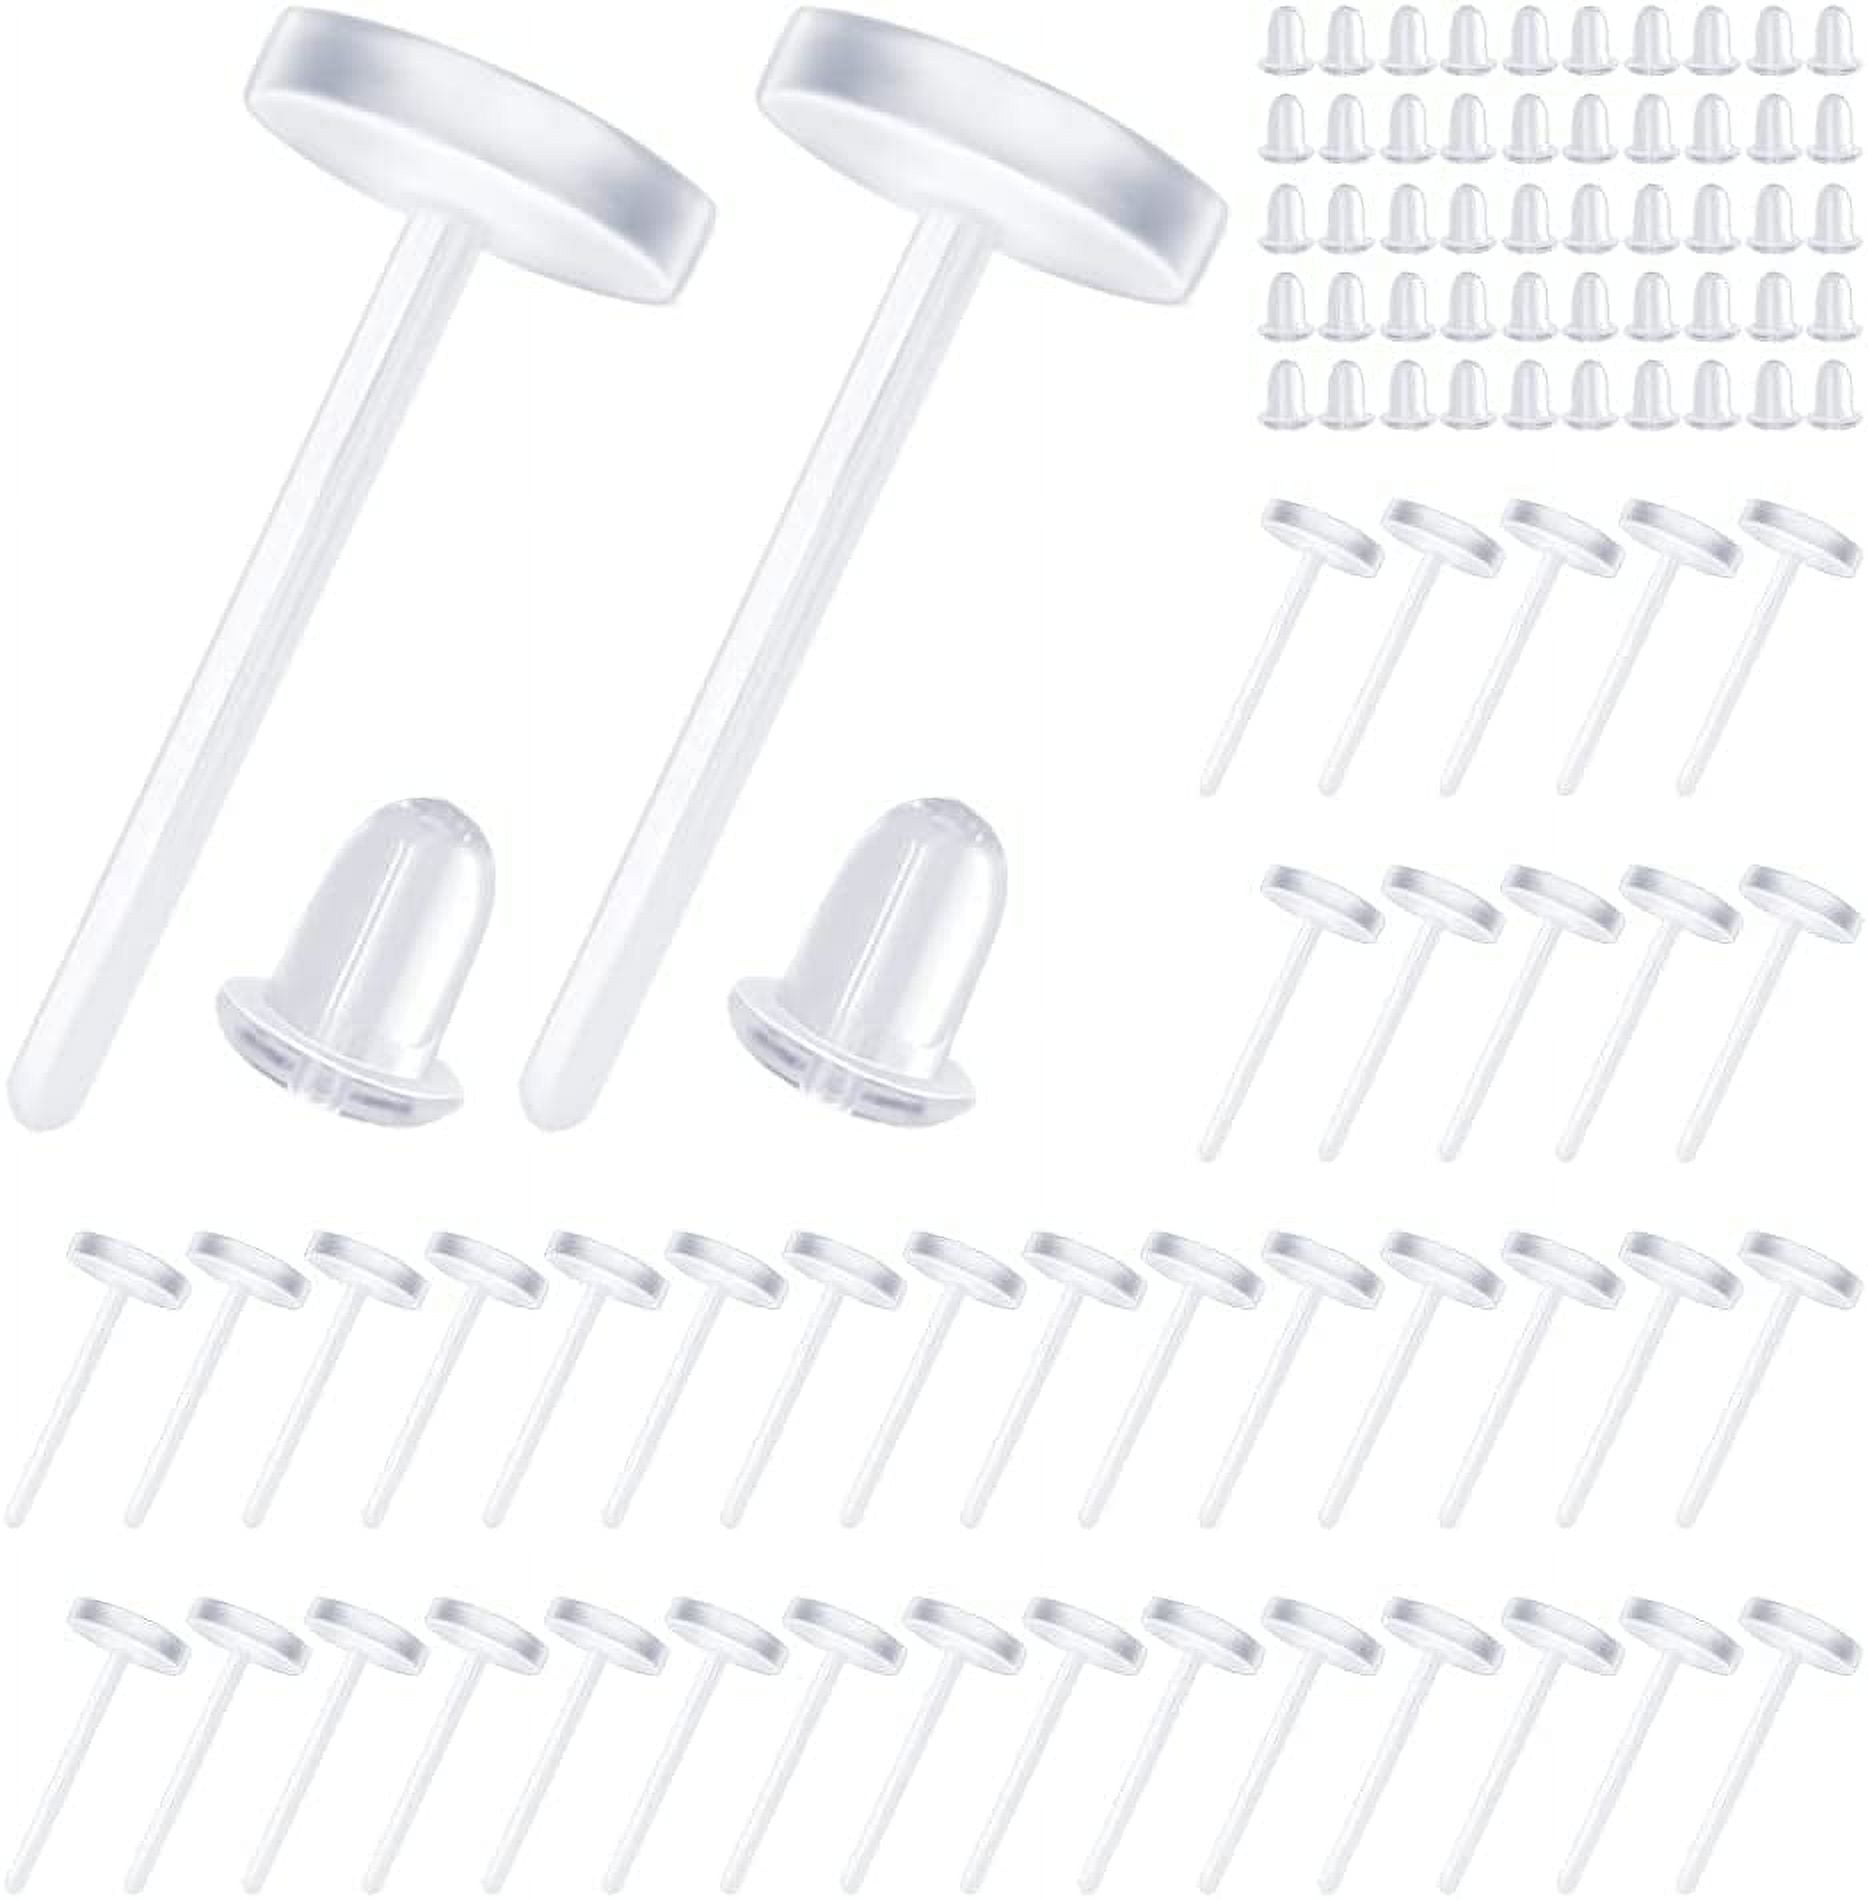 Clear Earring Studs, 3mm Plastic Invisible Earrings Blank Pins, Plastic  Earrings Posts Rubber Earrings for Surgery, Sport and Work (240 pieces/120